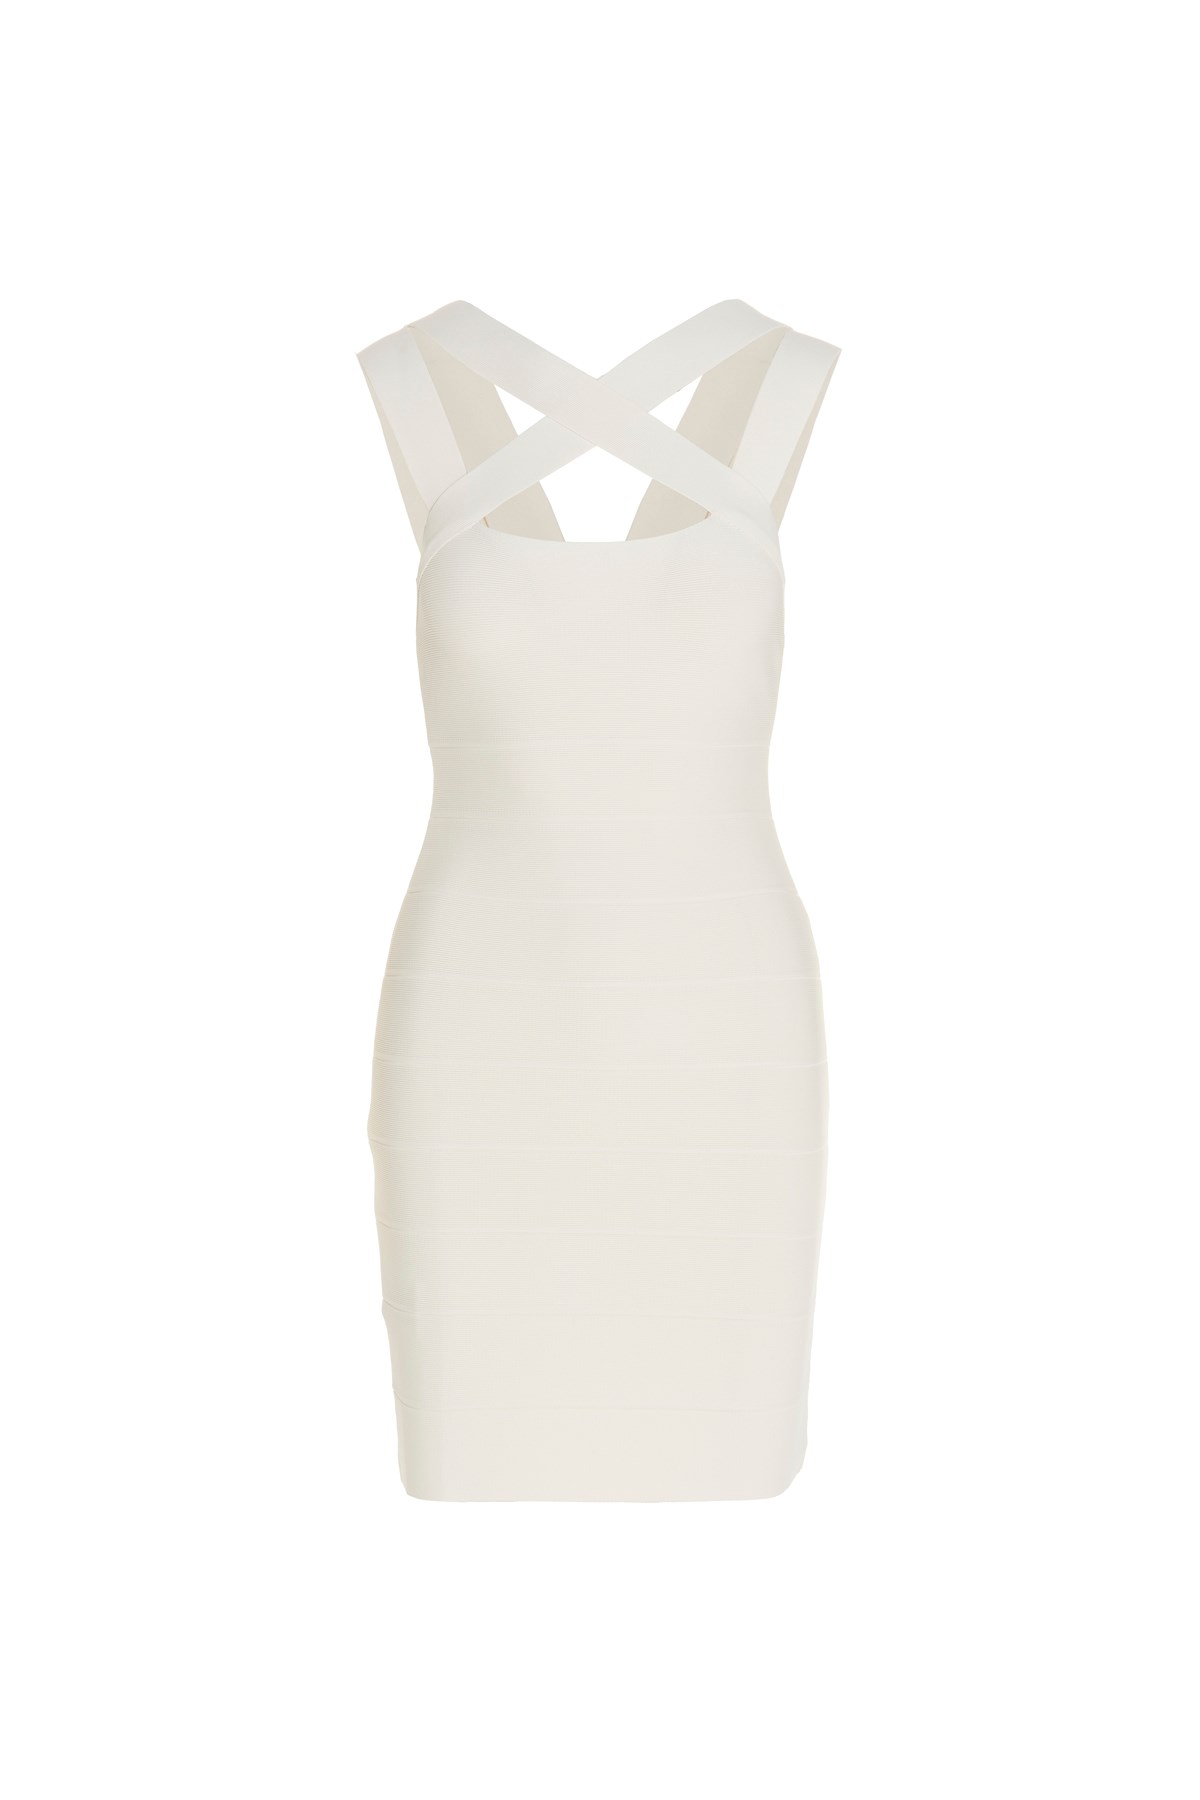 HERVE LEGER 'Icon Strappy’ Dress